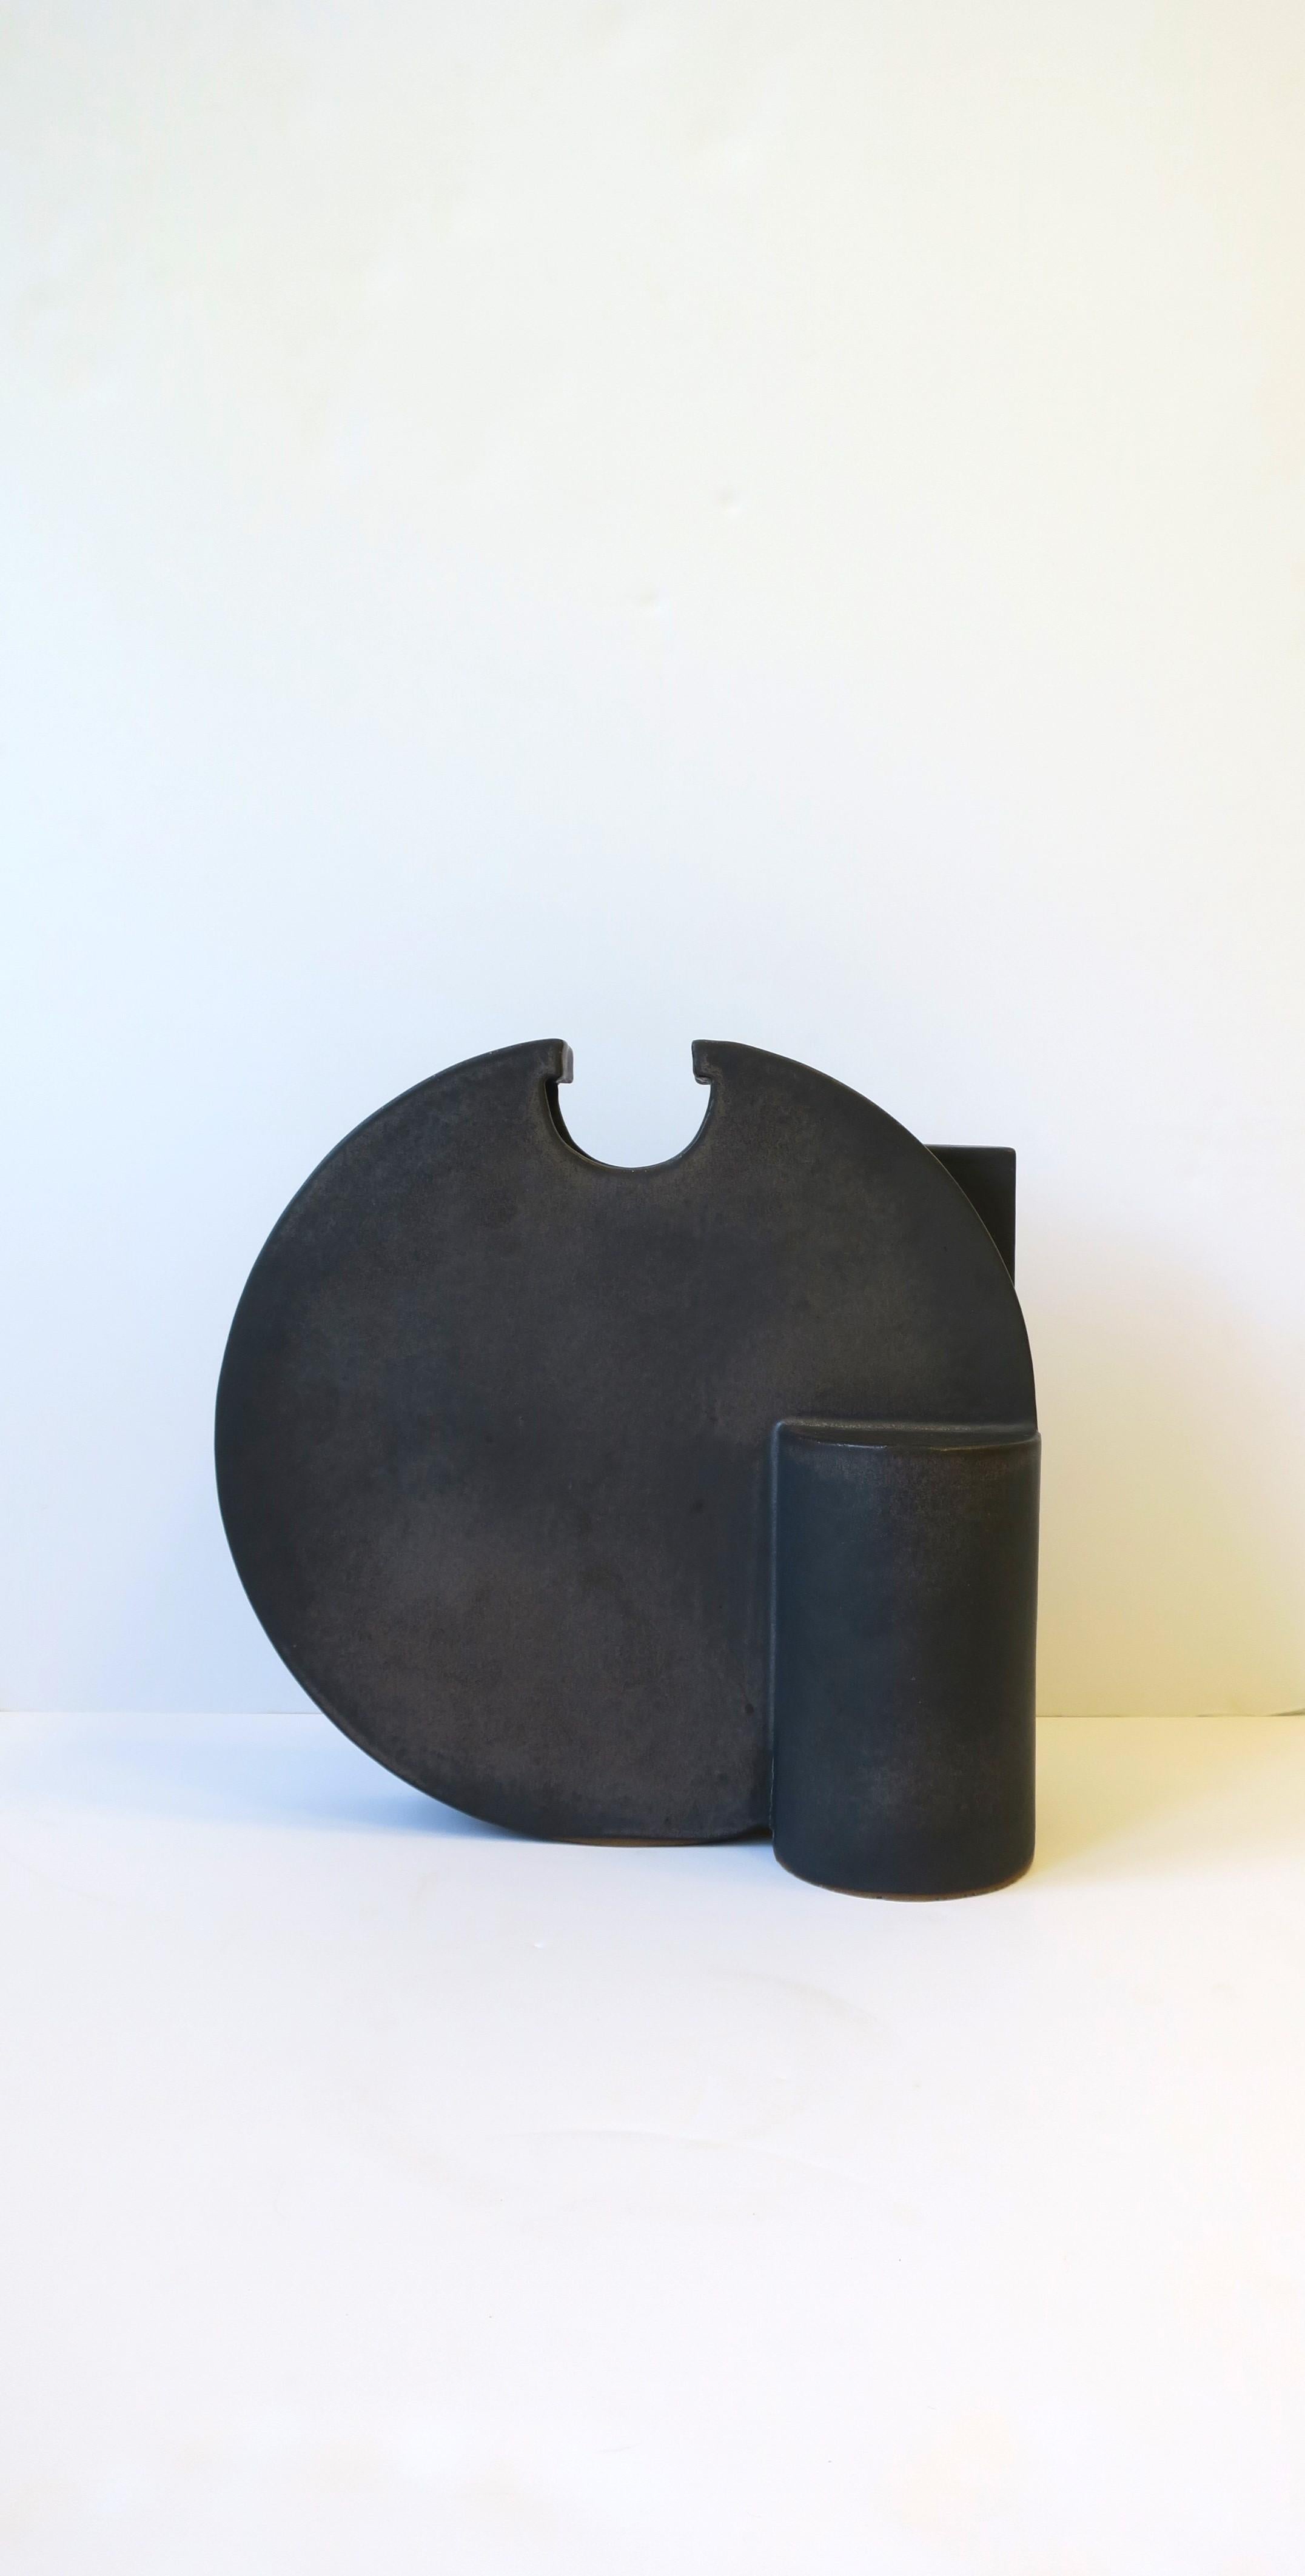 A beautiful and substantial Postmodern black charcoal sculpture vase, circa late-20th century. Piece is clay pottery with a black charcoal matte finish, with a round, cylindrical, asymmetric design. Designers mark on underside. For size perspective